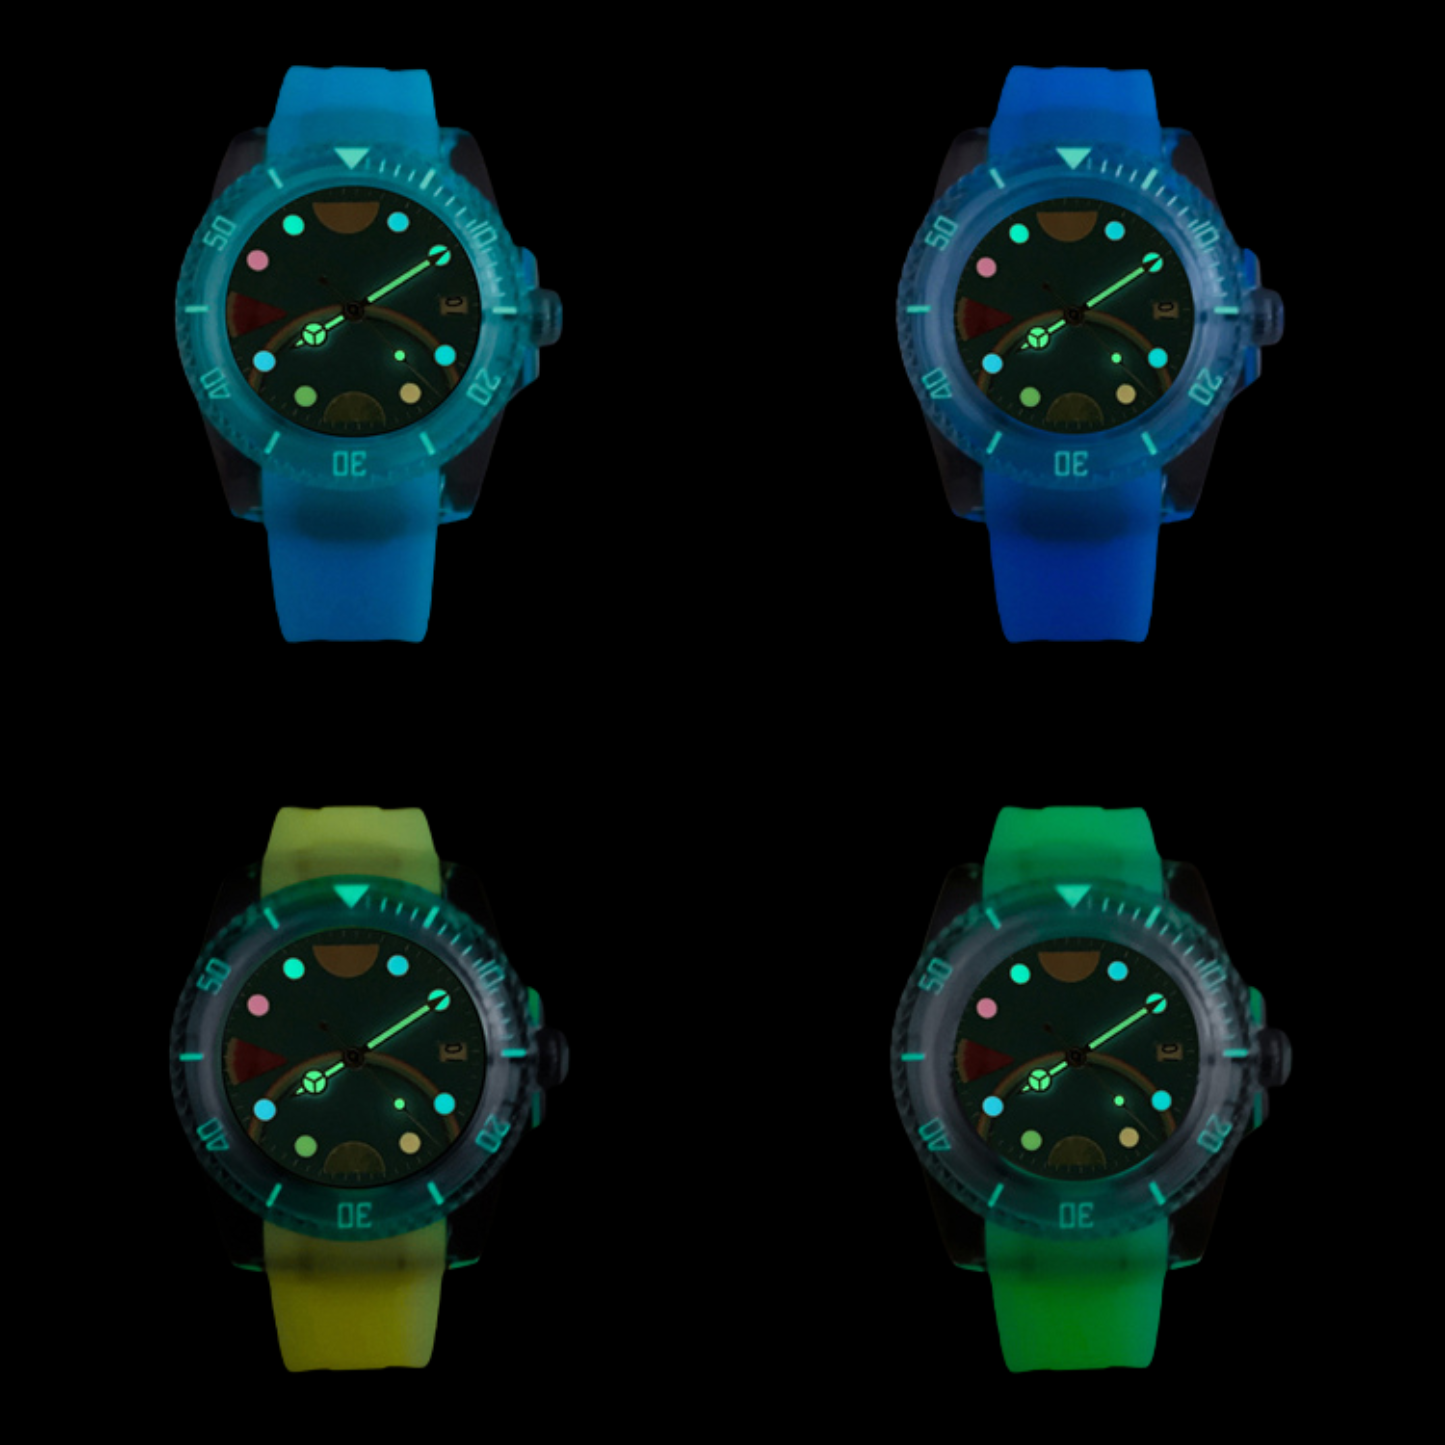 Watchartify Series Fruit Face 40MM NH35 Automatic Movement Tiffany Blue Rubber